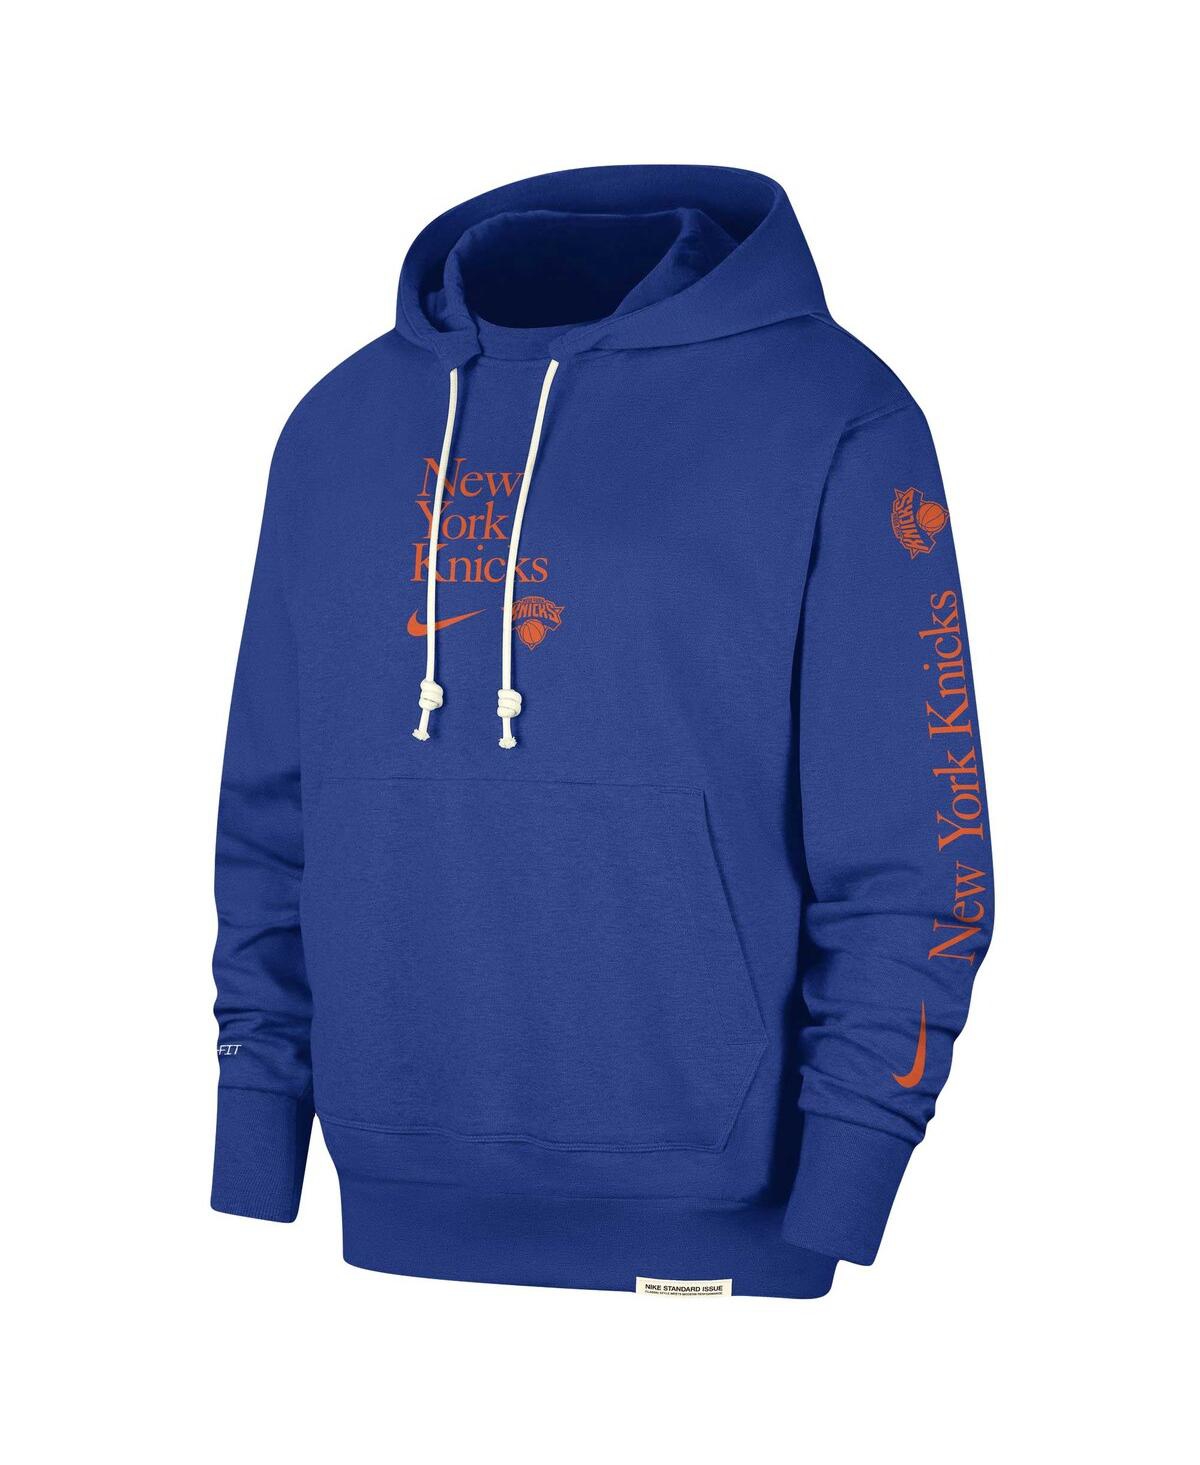 Shop Nike Men's  Blue New York Knicks Authentic Performance Pullover Hoodie